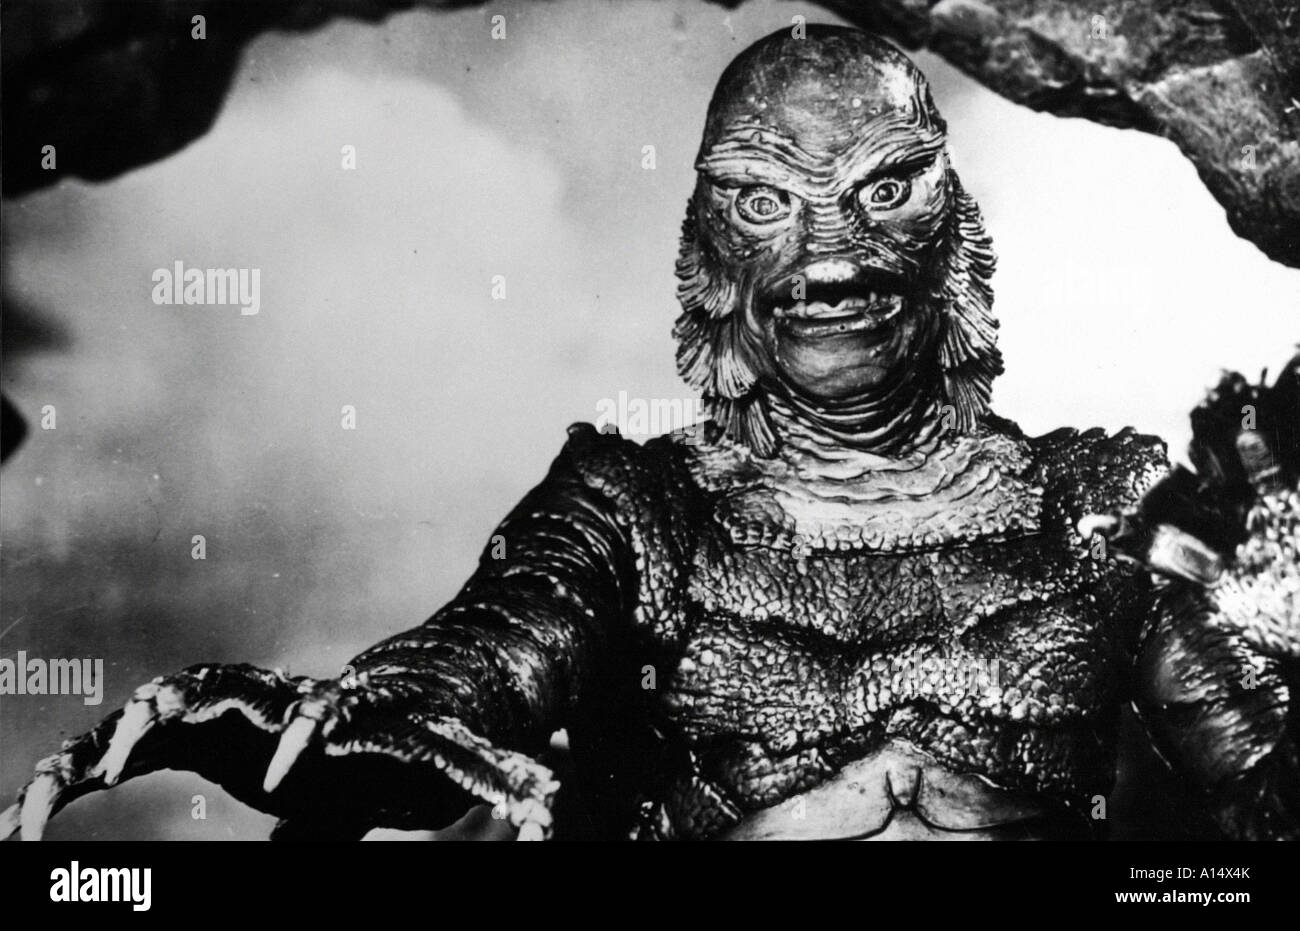 Creature from the black lagoon 1954 Jack Arnold Stock Photo